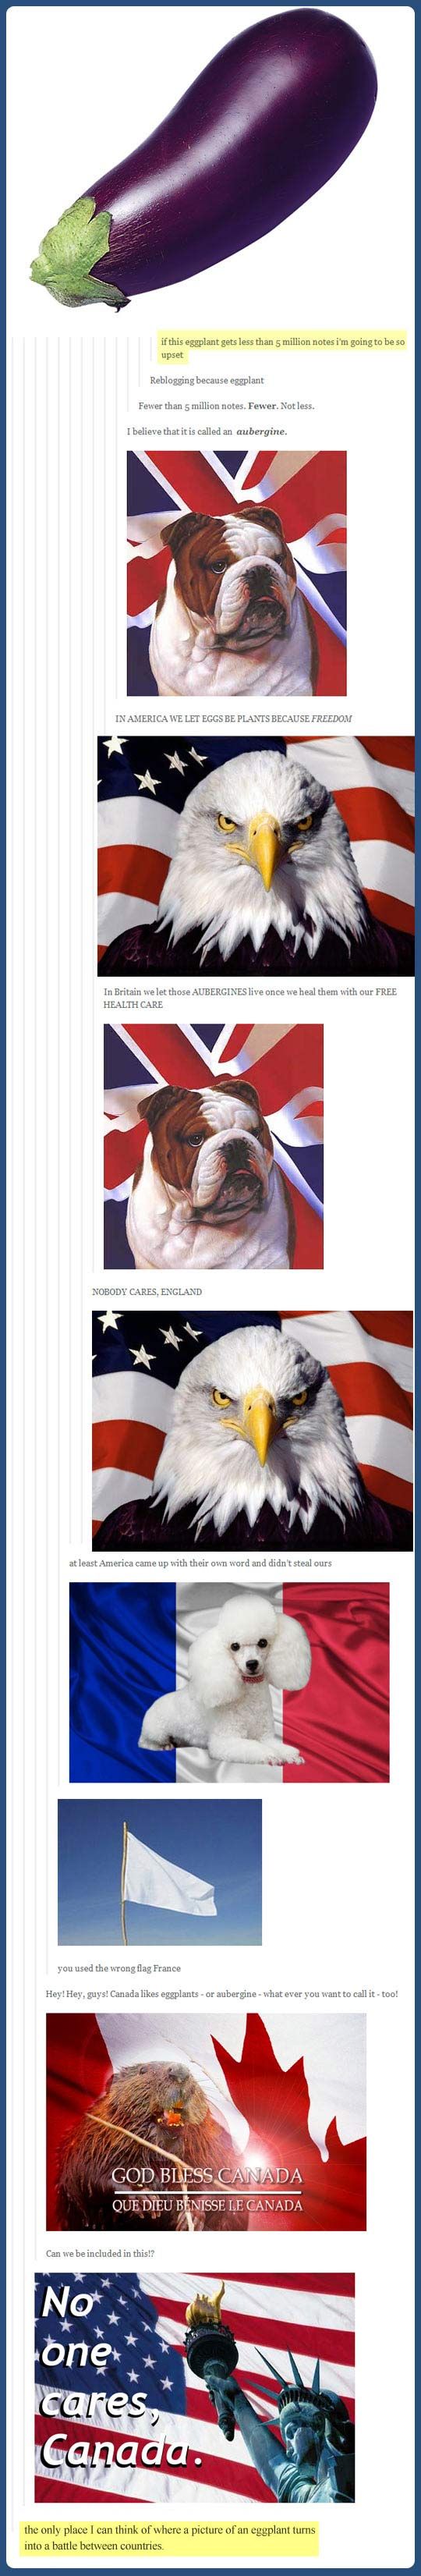 19 More Glorious ‘Murica Pictures